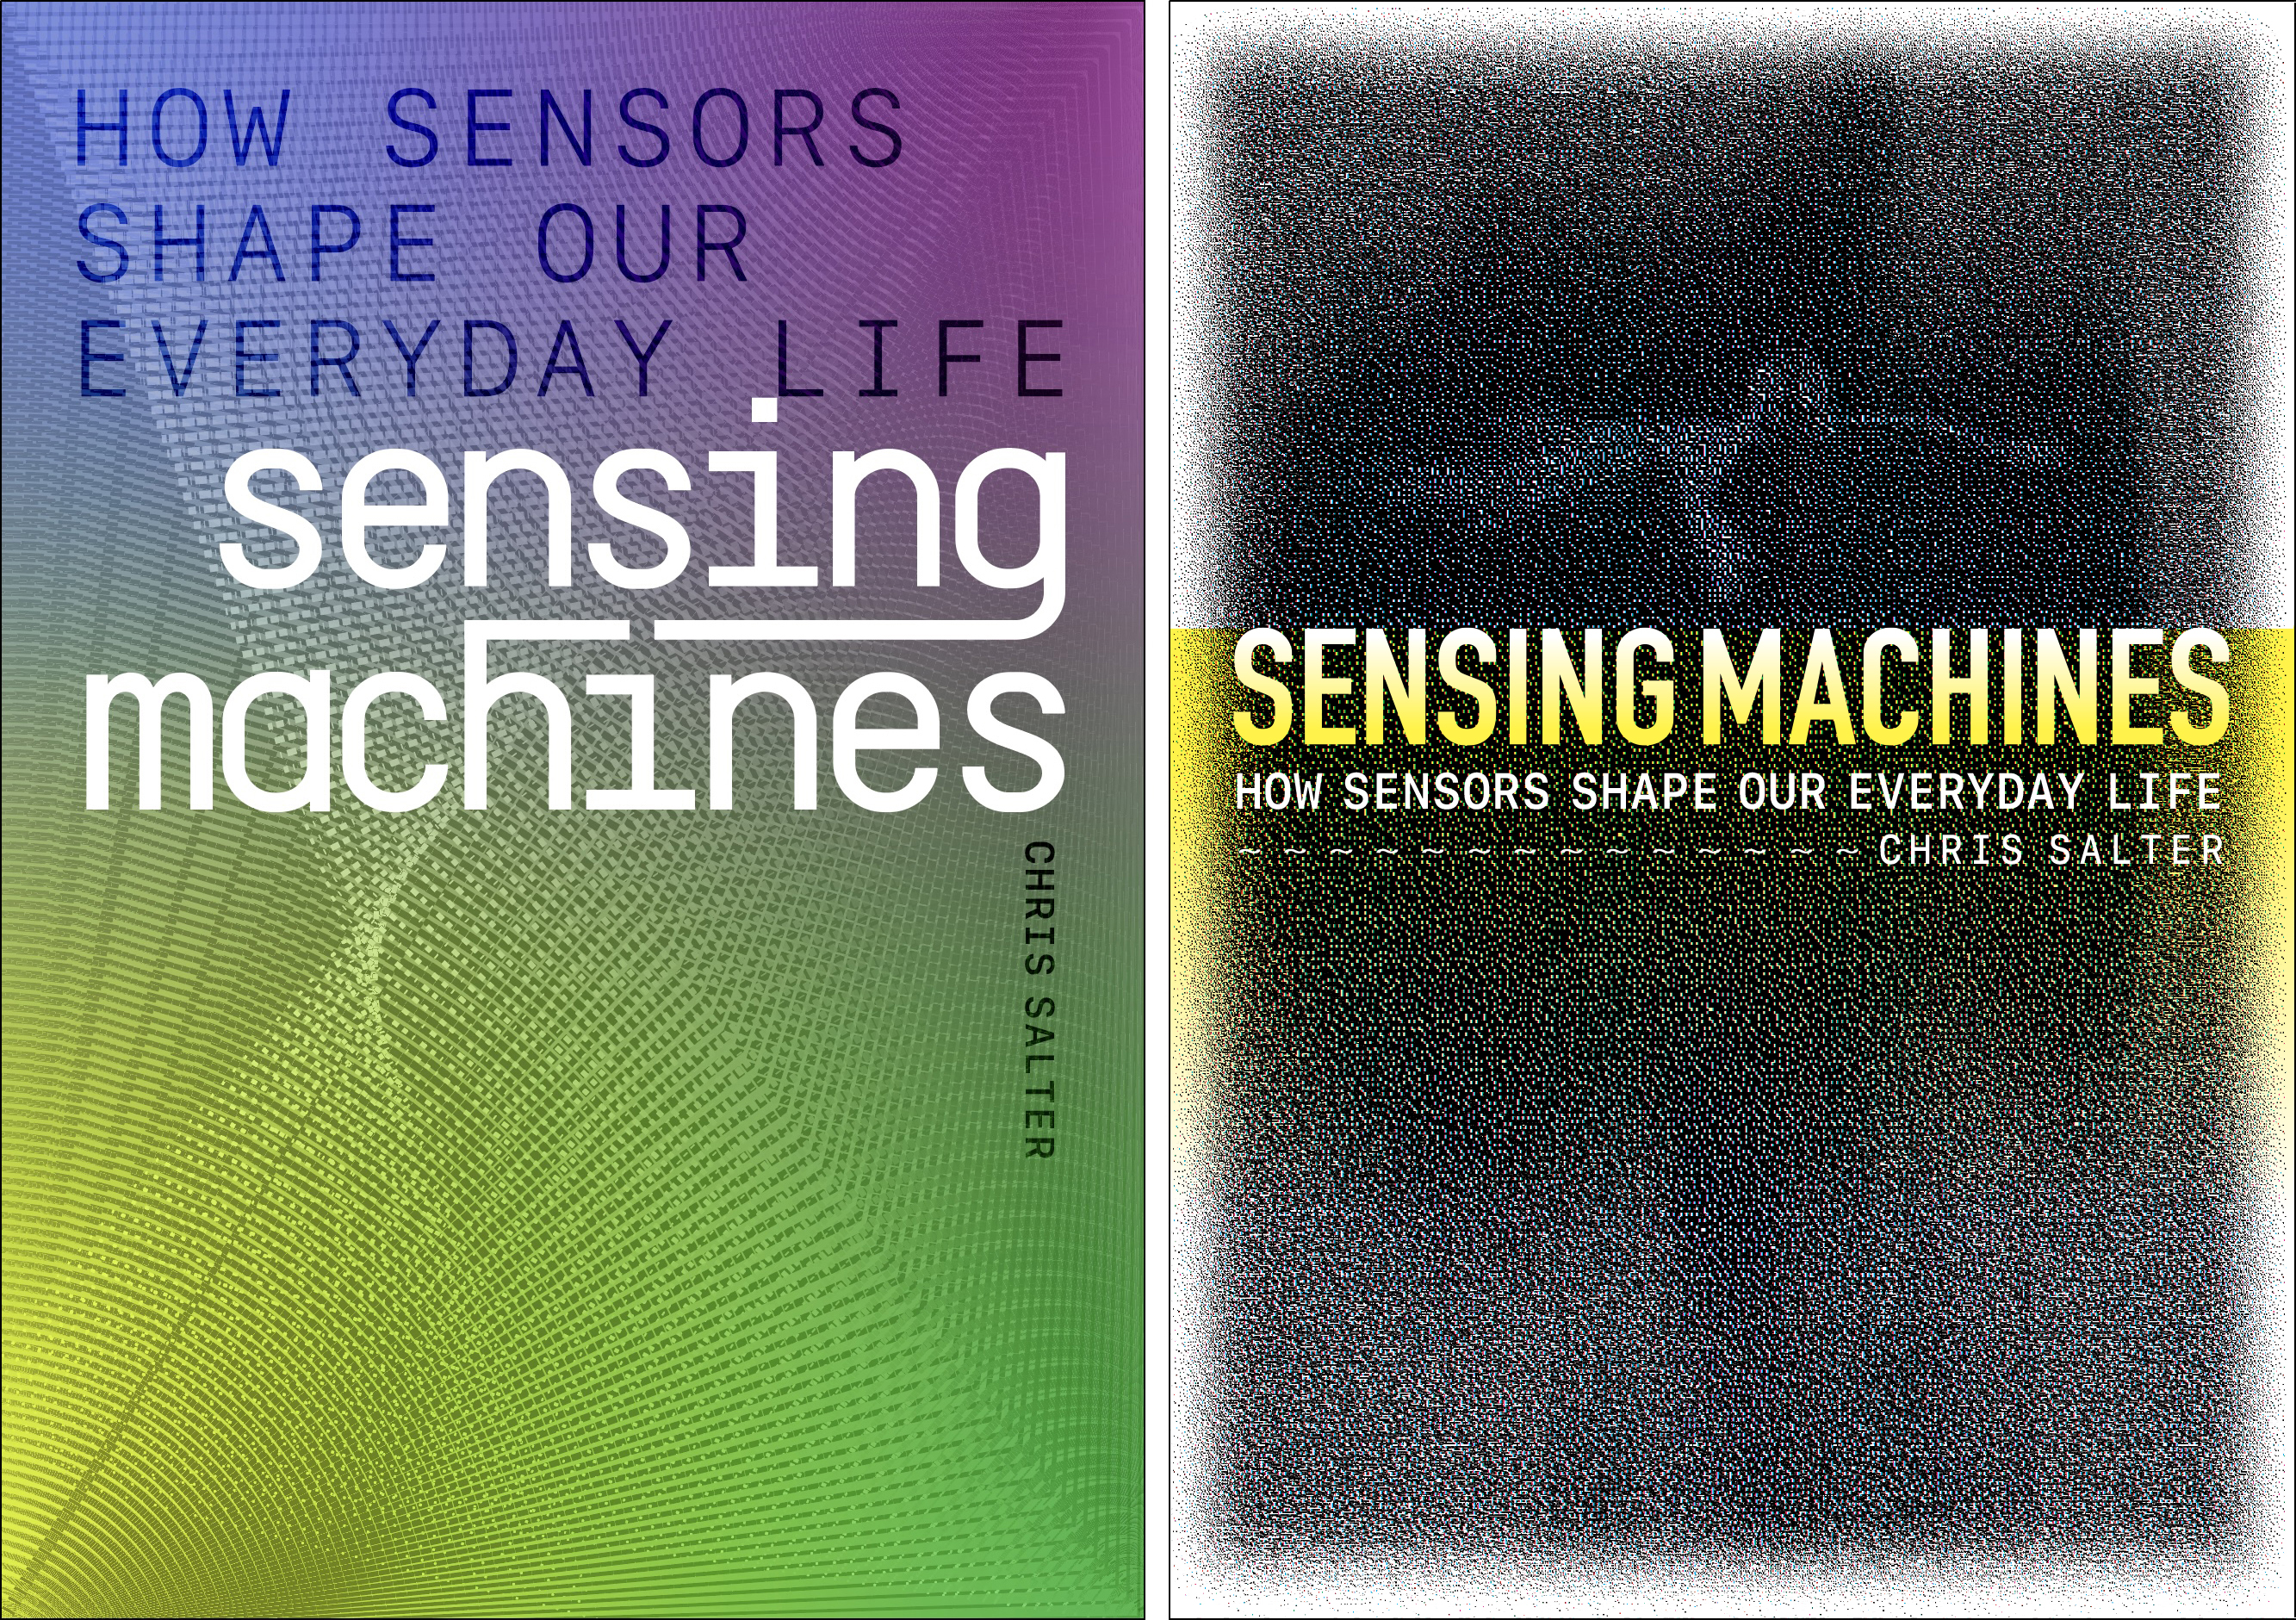 Chris Salter's Sensing Machines book cover book cover design and imagery by Erik Adigard, M-A-D/Madxs in 2021-22